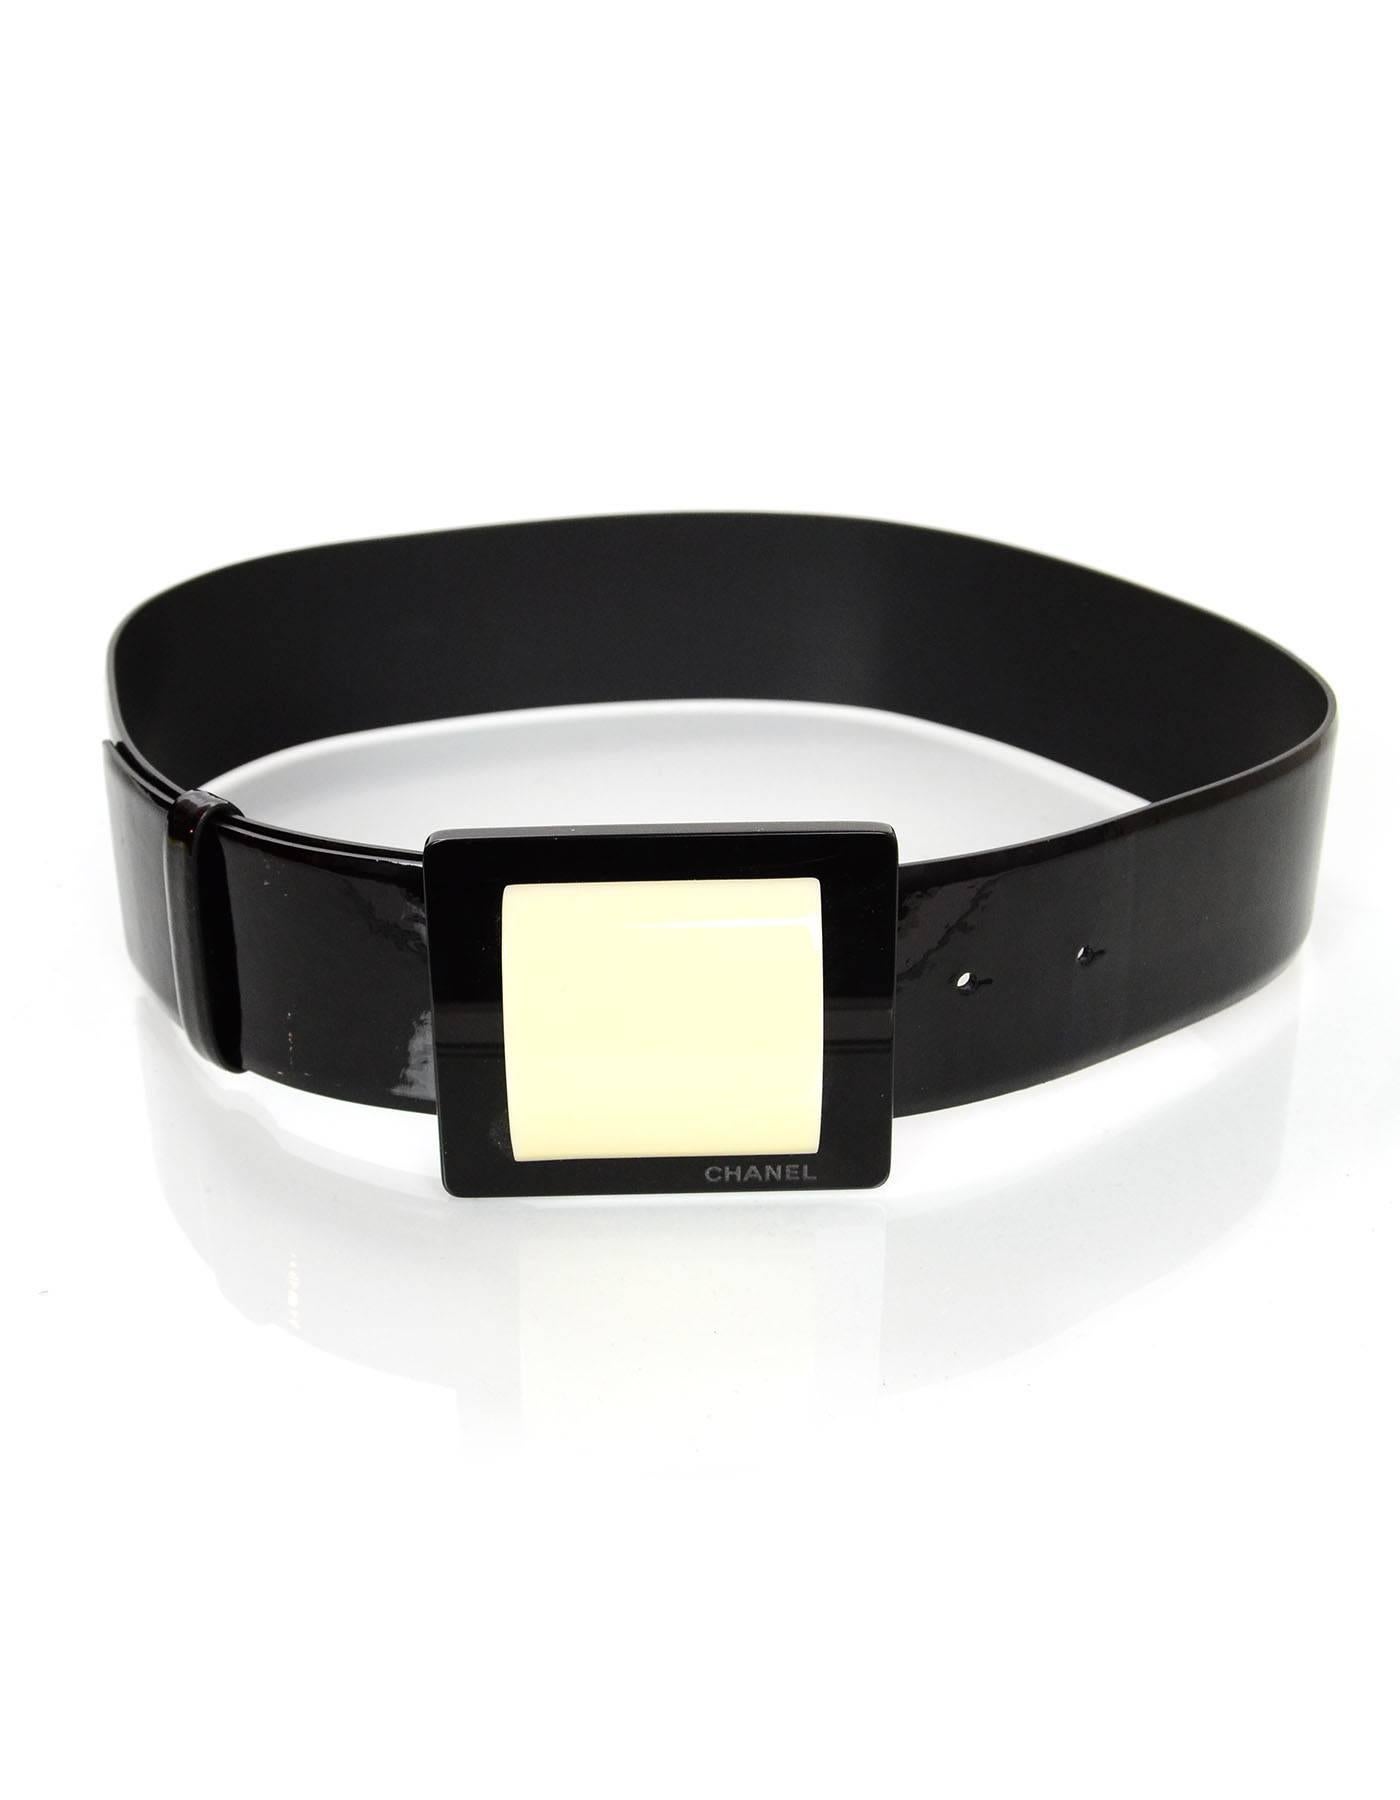 Chanel Black Patent Wide Belt 
Features ivory resin detail on buckle
Year of Production: 2007
Color: Black and ivory
Materials: Patent leather, resin and metal
Closure/Opening: Buckle and notch closure
Stamp: CHANEL
Overall Condition: Excellent